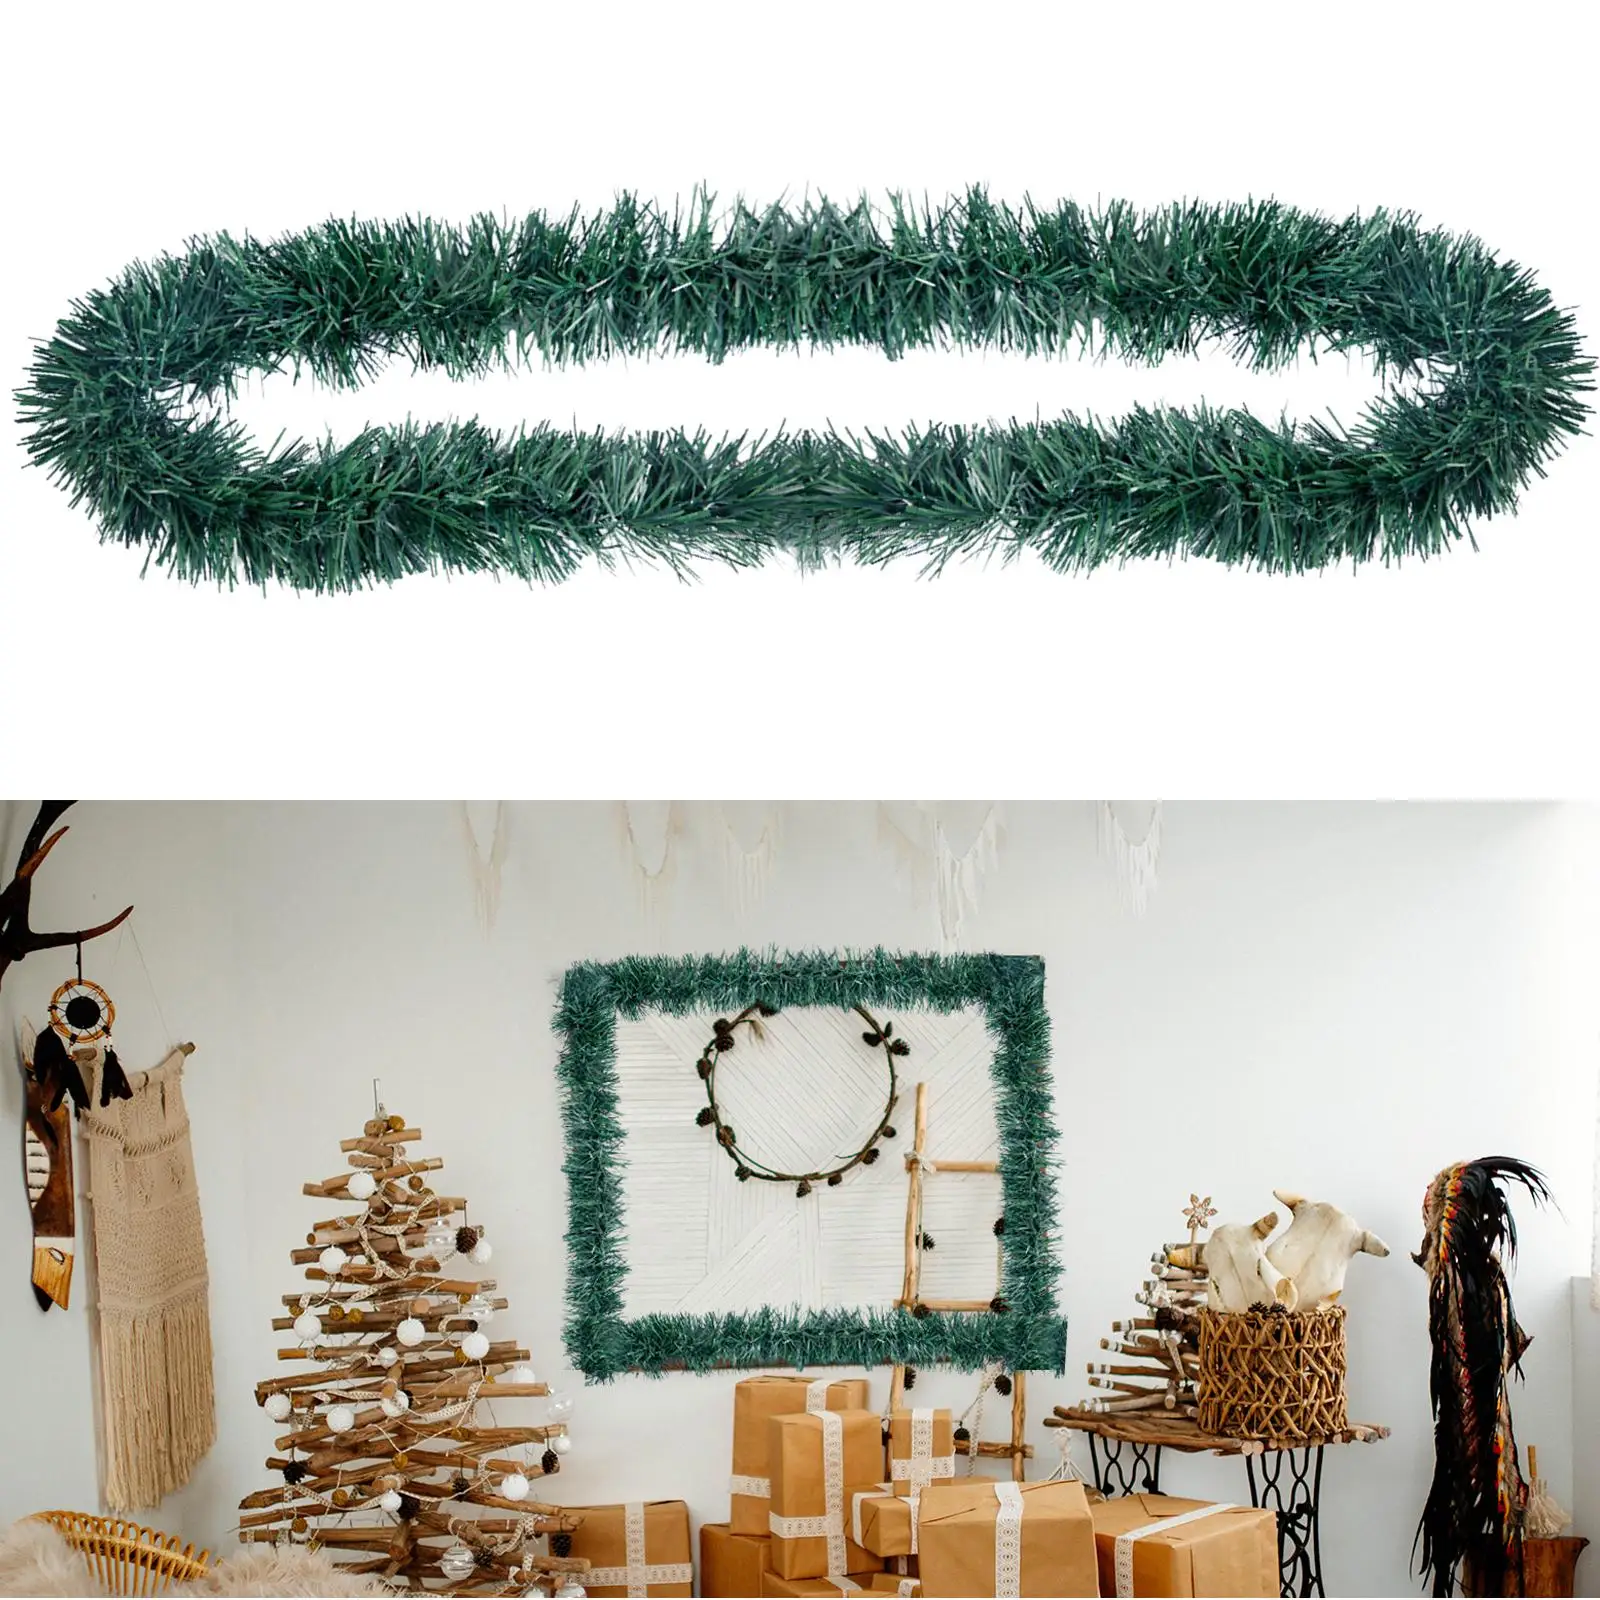 2Pcs Christmas Garland Christmas Collection Holiday Party Decor Green for Winter Holiday Windows Wall Mantel Fireplace Garden